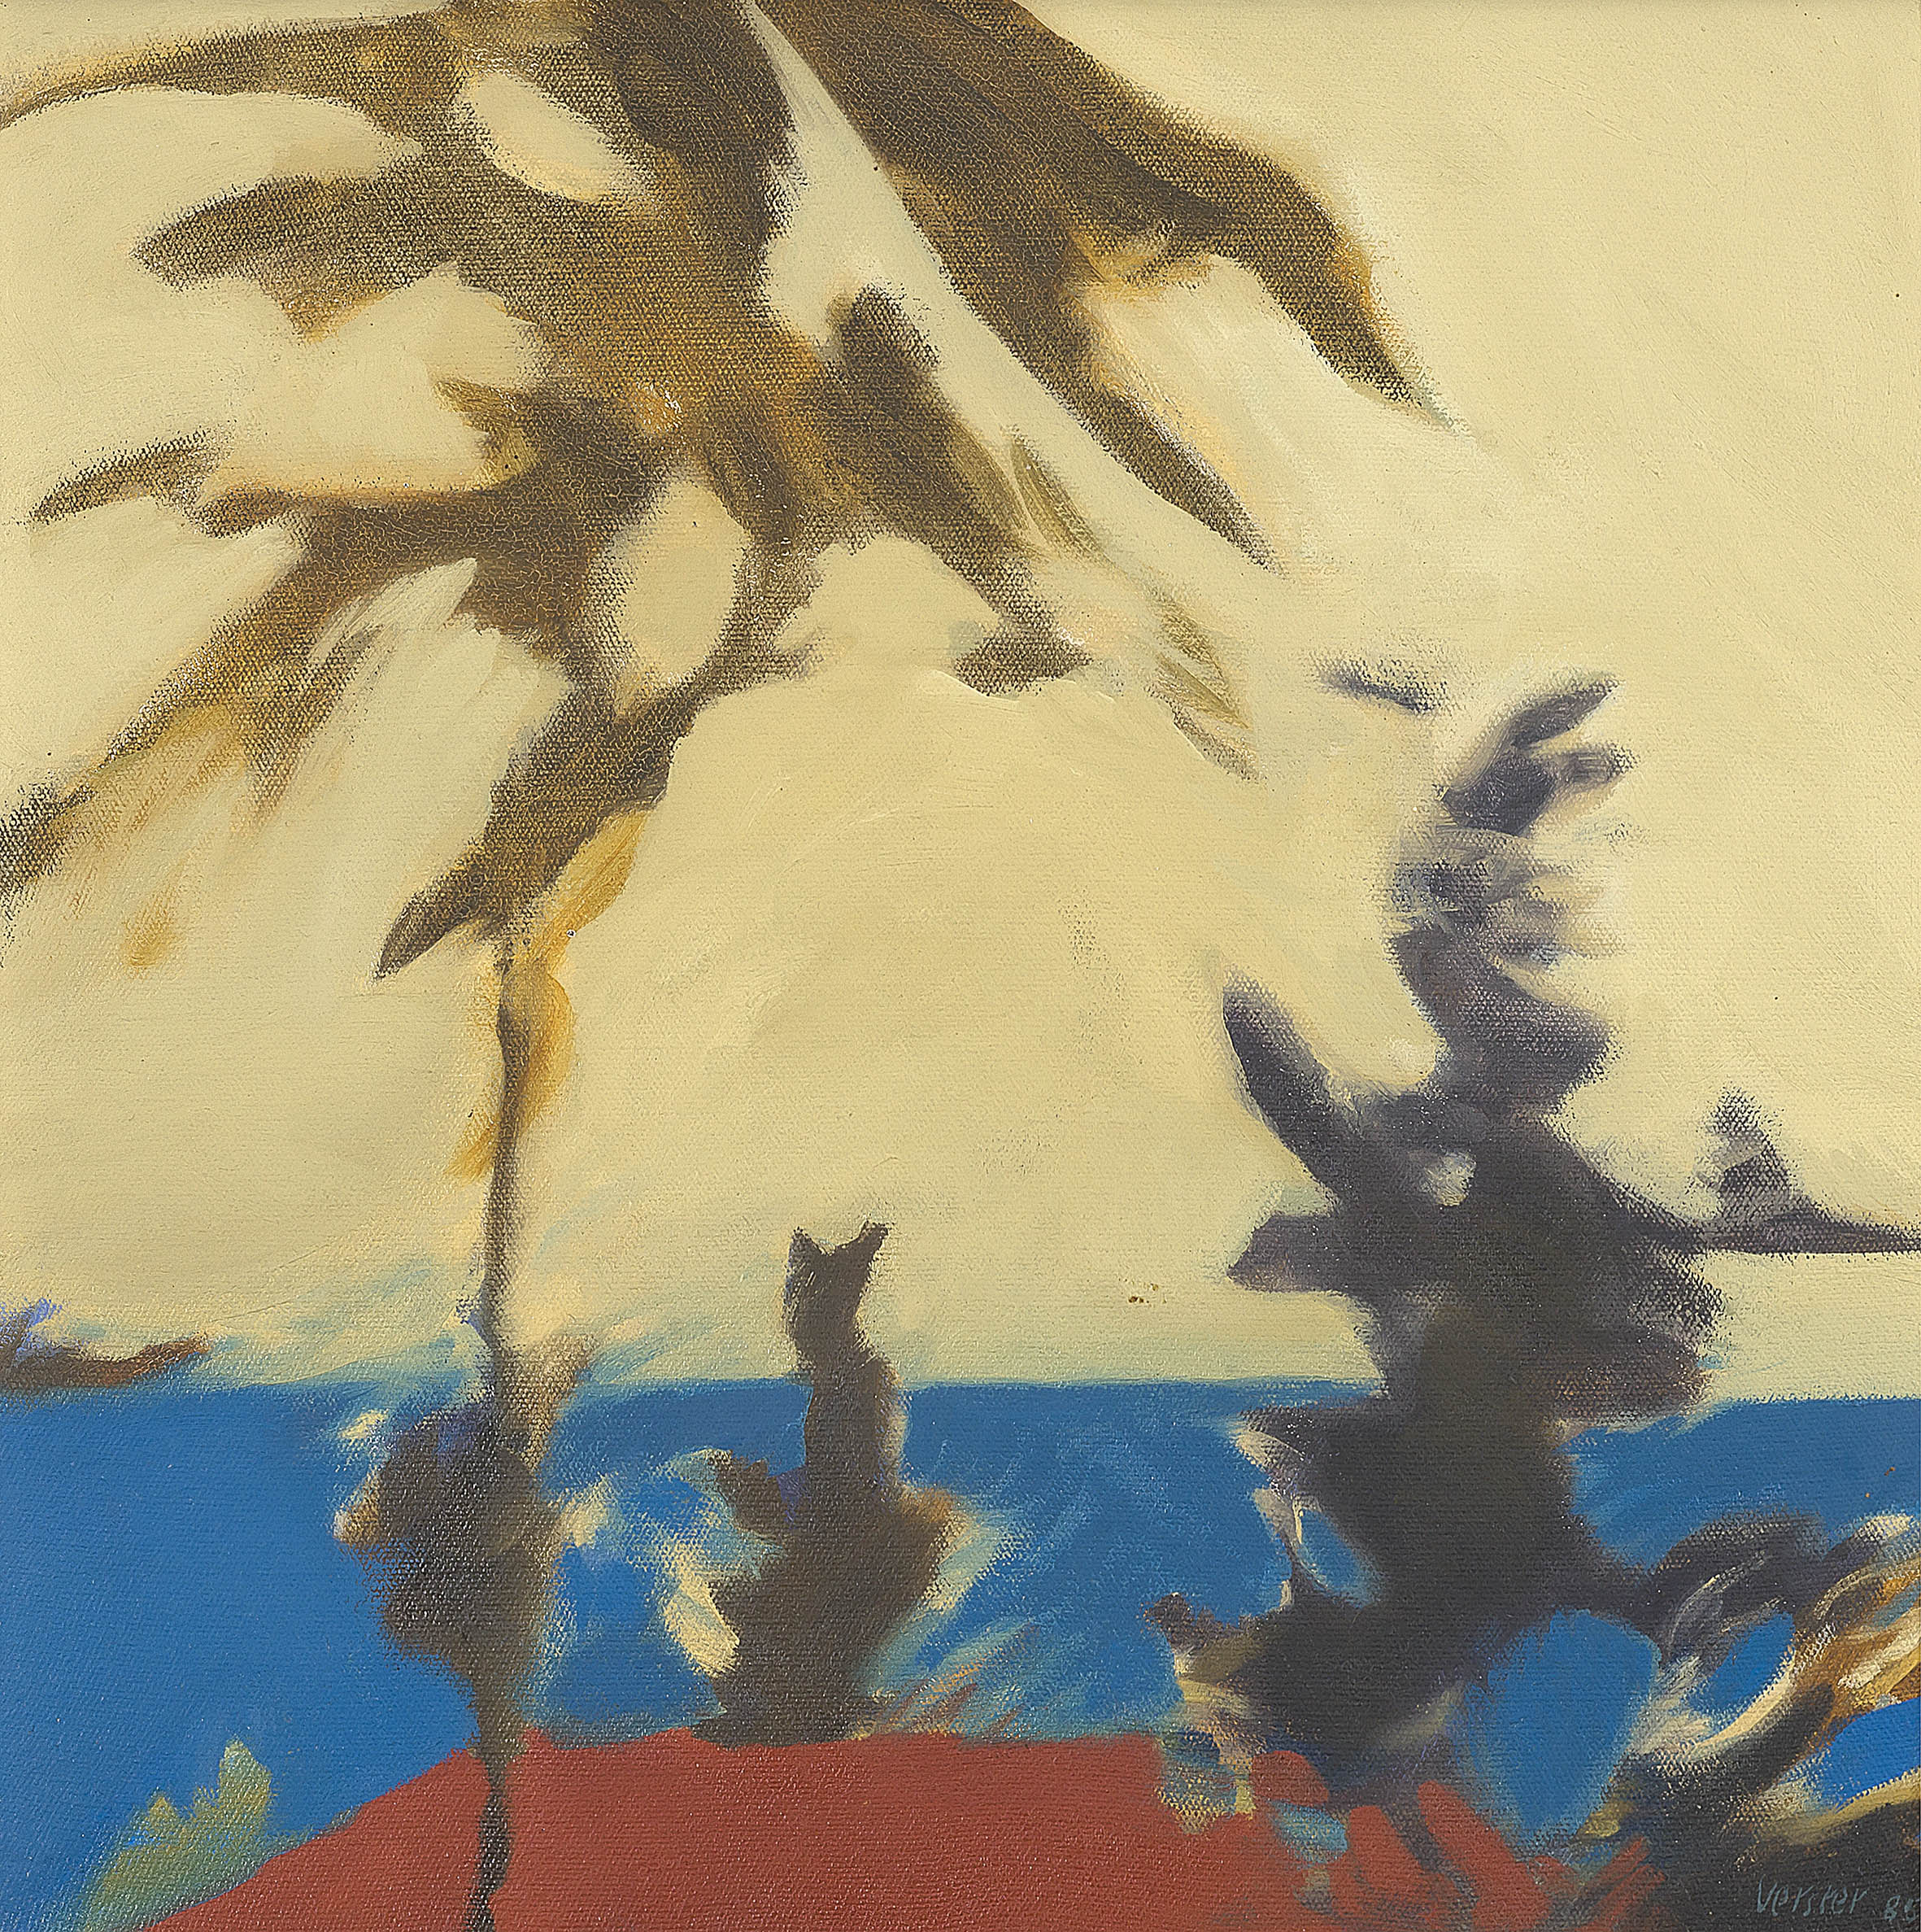 Andrew Verster; Background: Palms and Rooftops